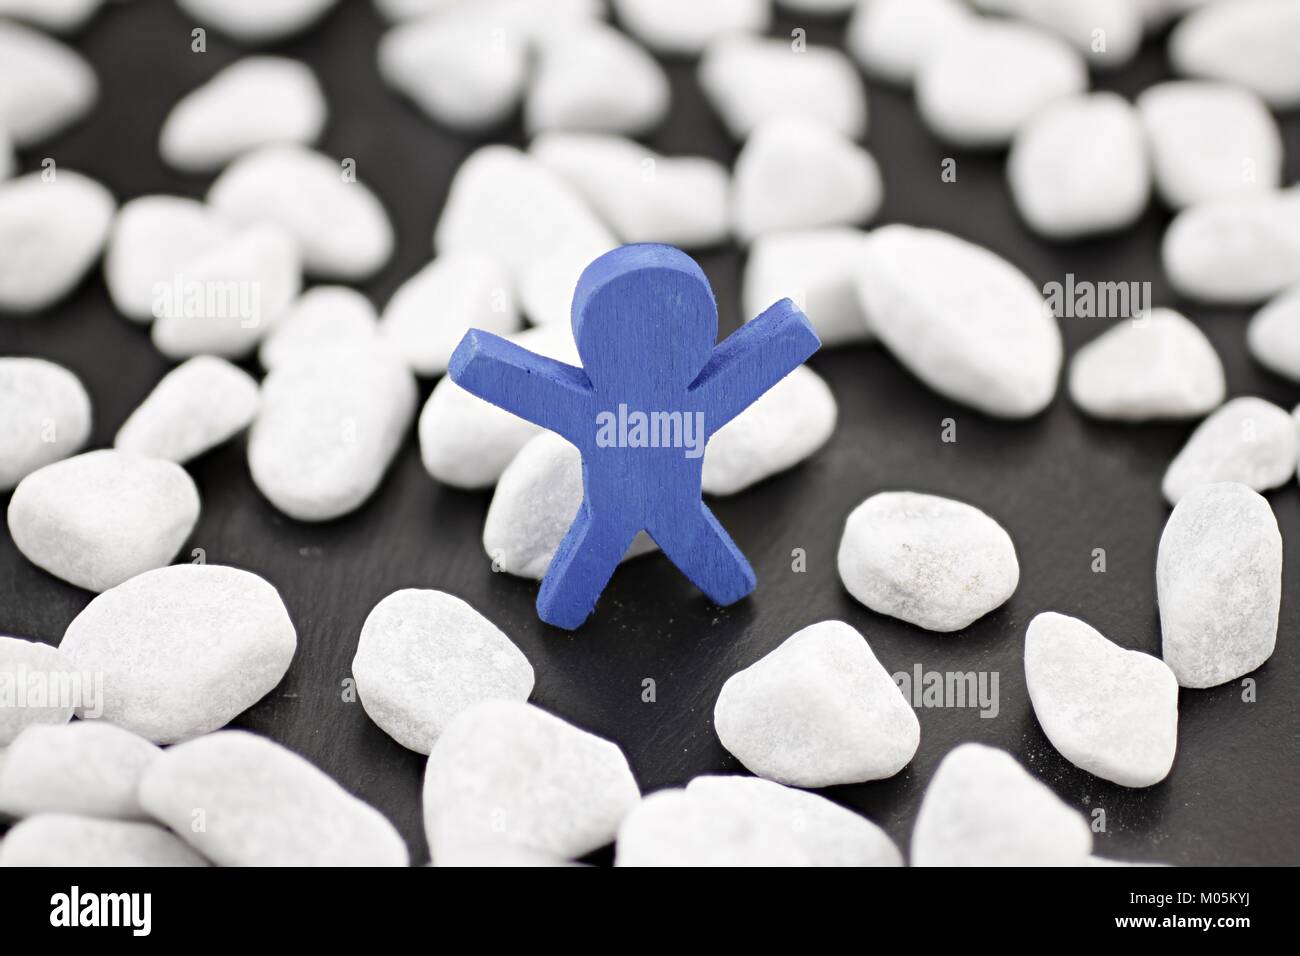 A blue male stands alone in a group of white pebbles Stock Photo